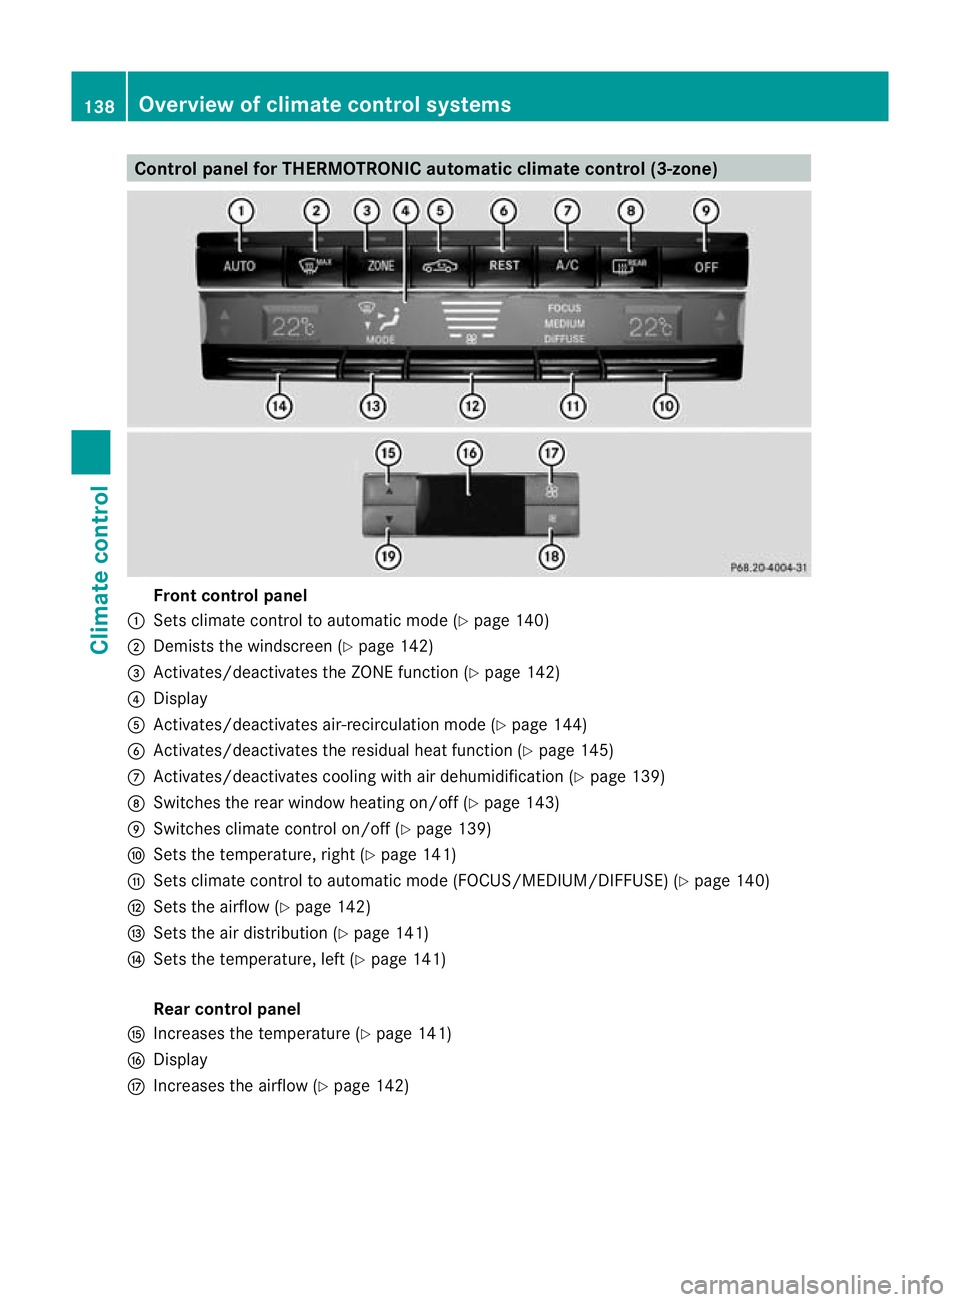 MERCEDES-BENZ E-CLASS ESTATE 2011  Owners Manual Control panel for THERMOTRONIC automatic climate control (3-zone)
Fron
tcontrol panel
: Sets climate control to automatic mode (Y page 140)
; Demists the windscreen (Y page 142)
= Activates/deactivate